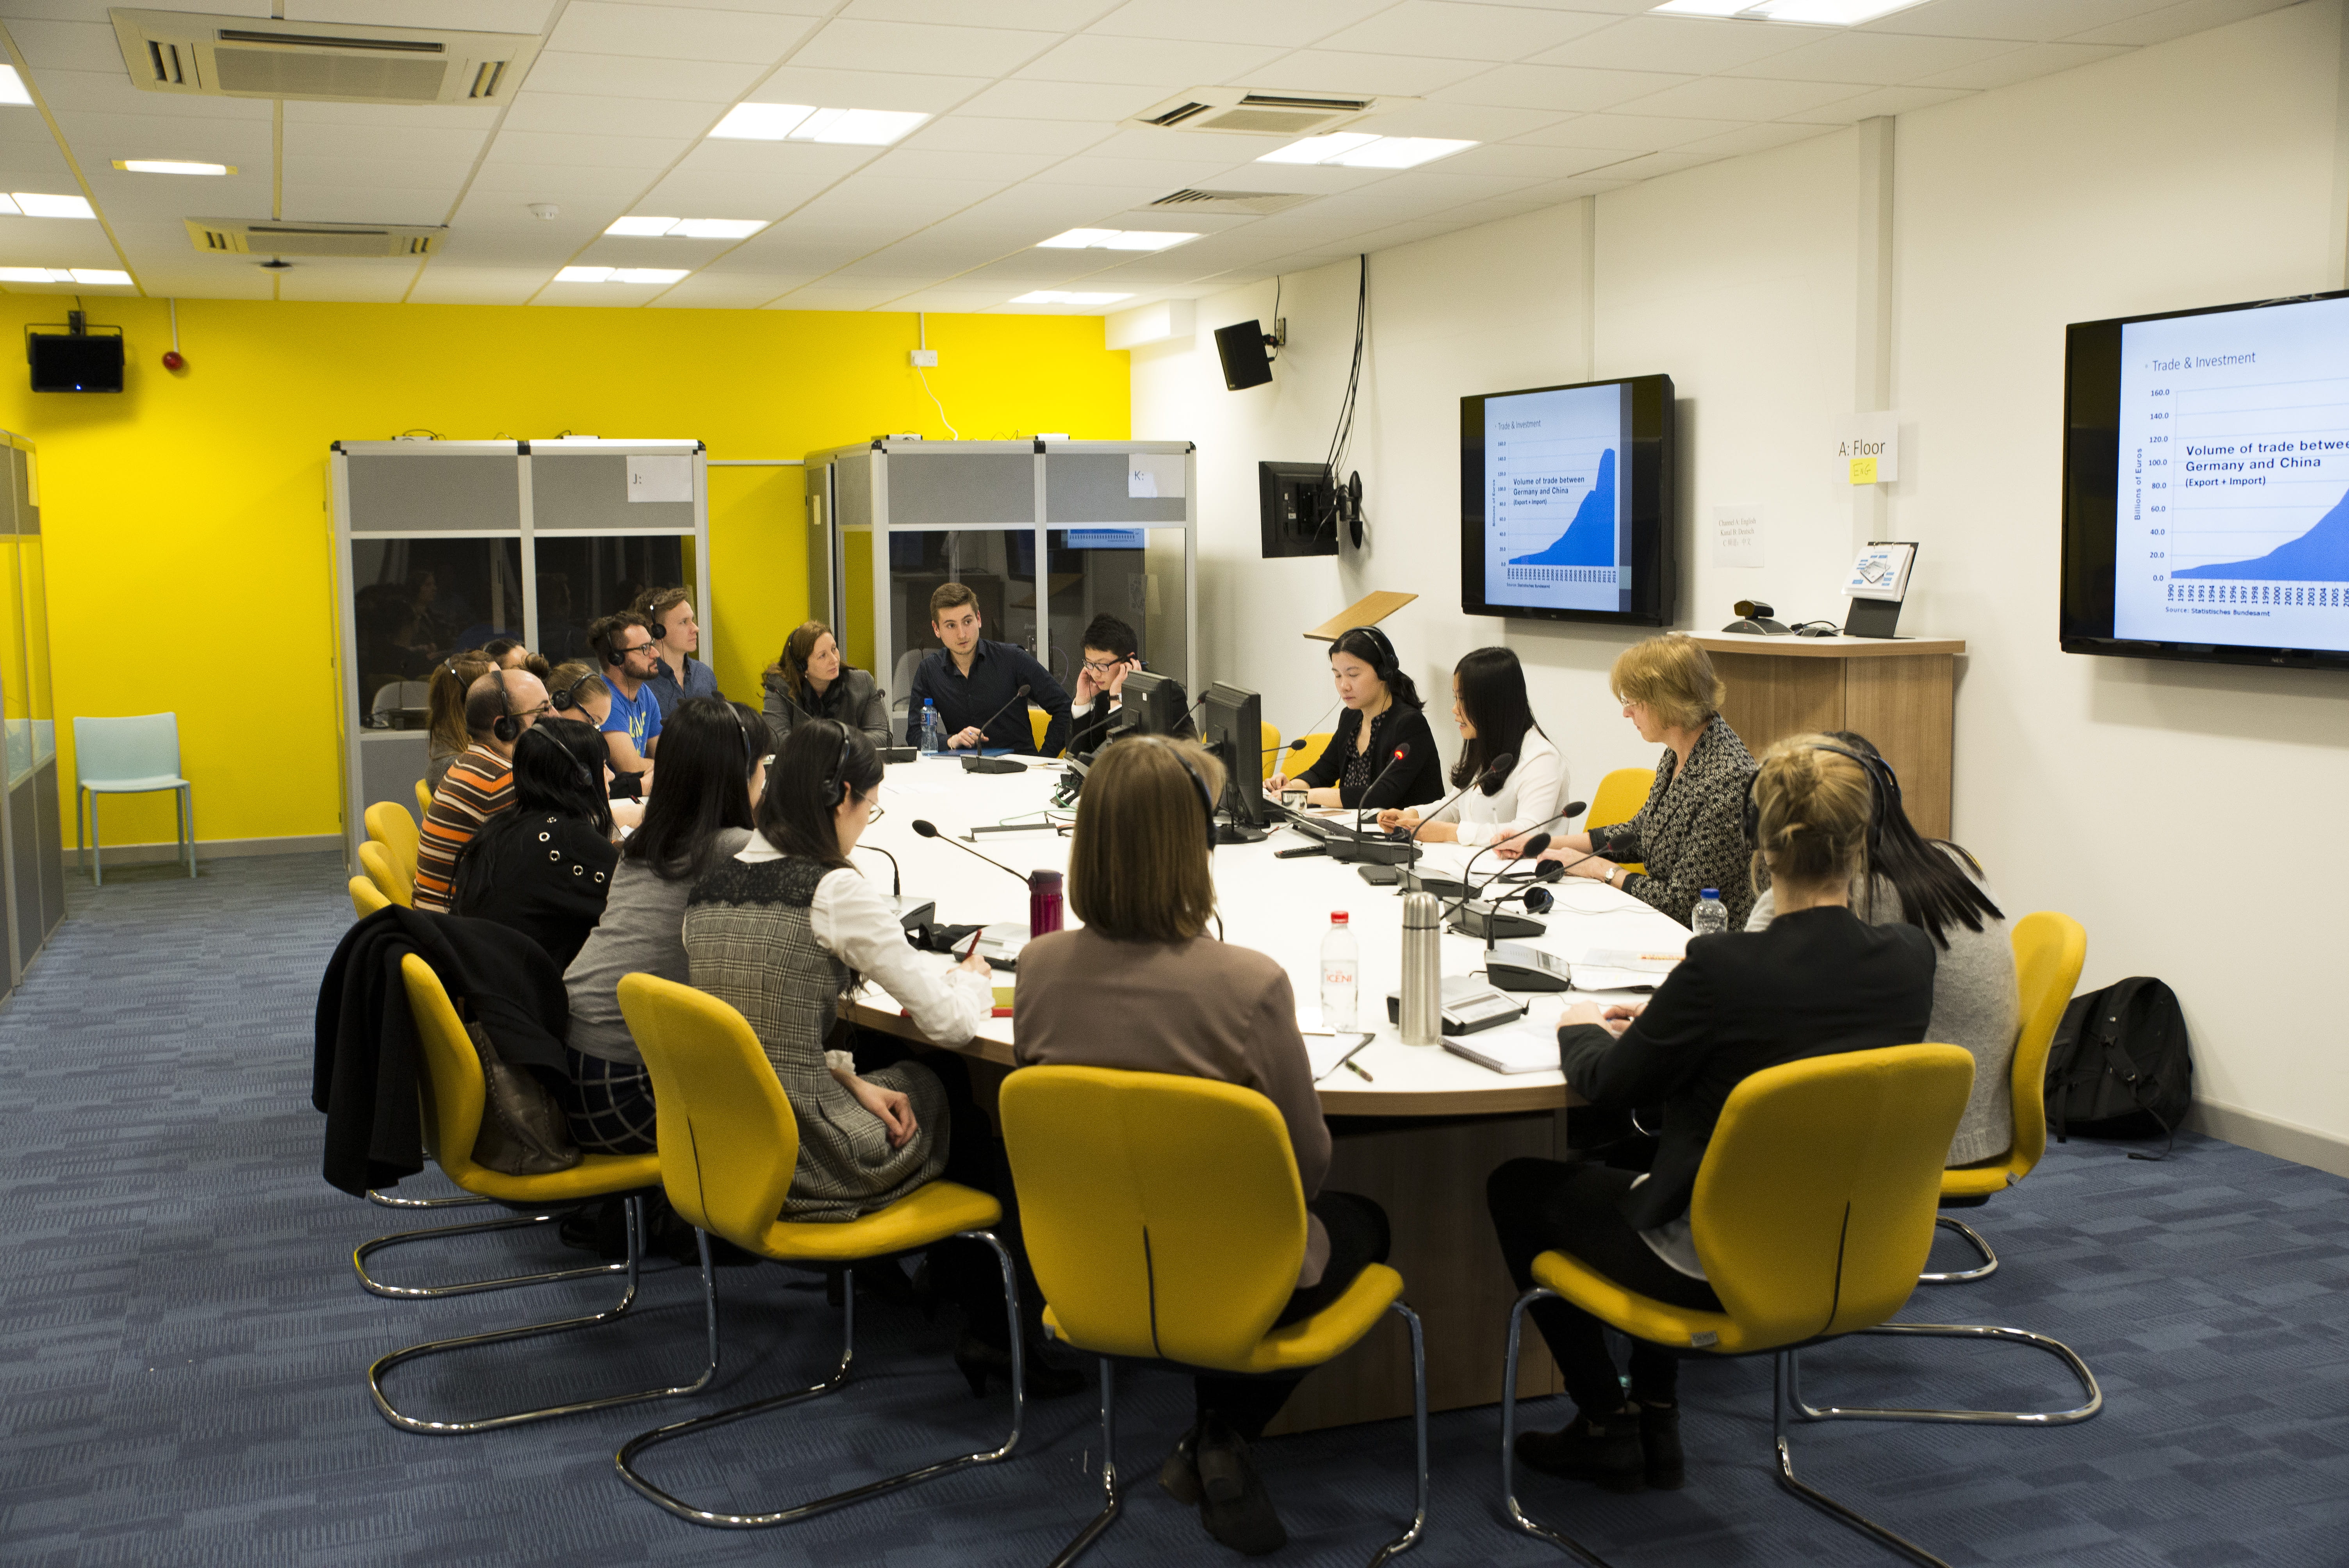 Students taking part in a mock conference within our interpreting lab - students sitting around a round table, with microphones and interpreting equipment